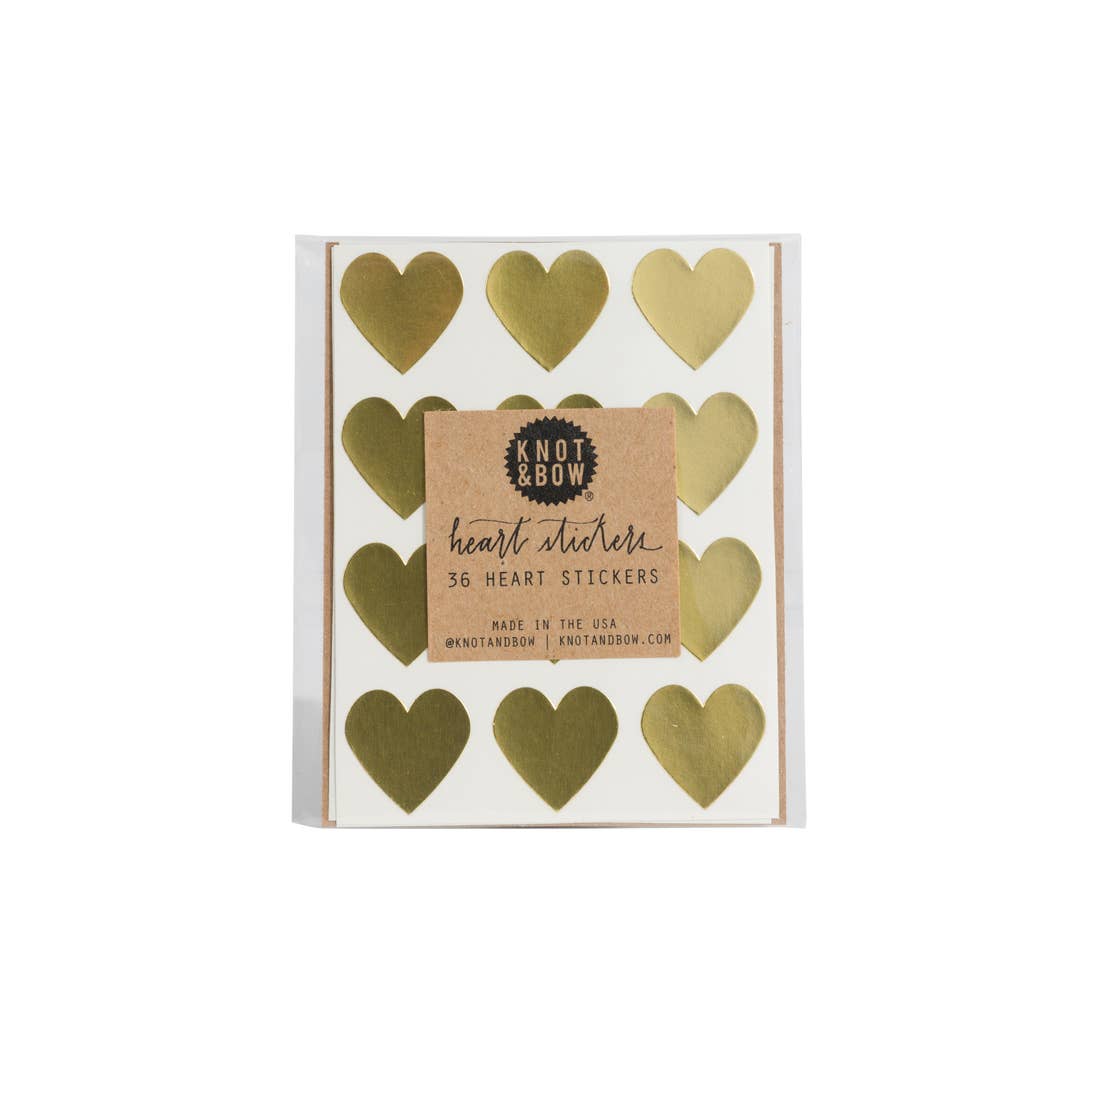 Heart Stickers by Knot & Bow - Gold by Knot & Bow - K. A. Artist Shop